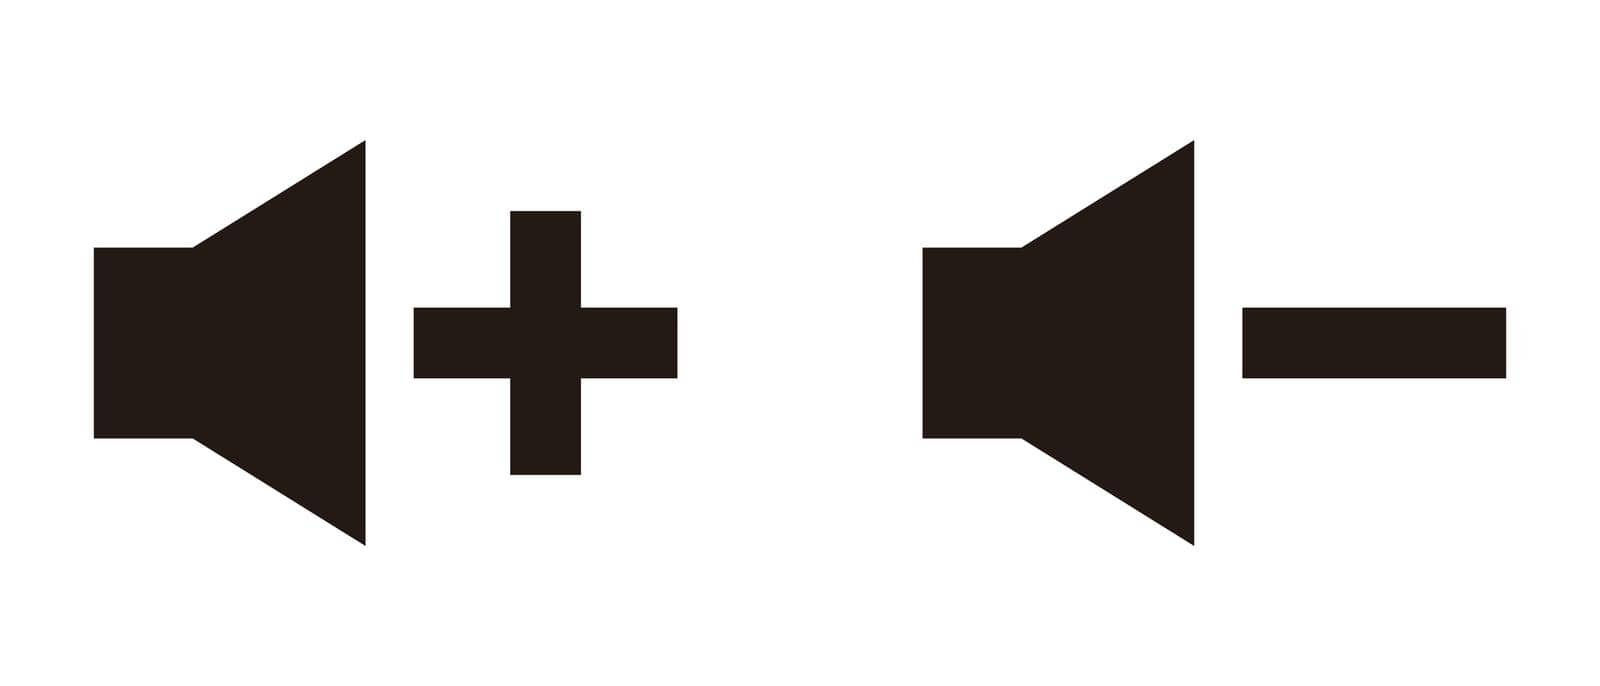 A button to turn up the volume and an icon to turn down the volume. Sound-related vectors. Editable vector.